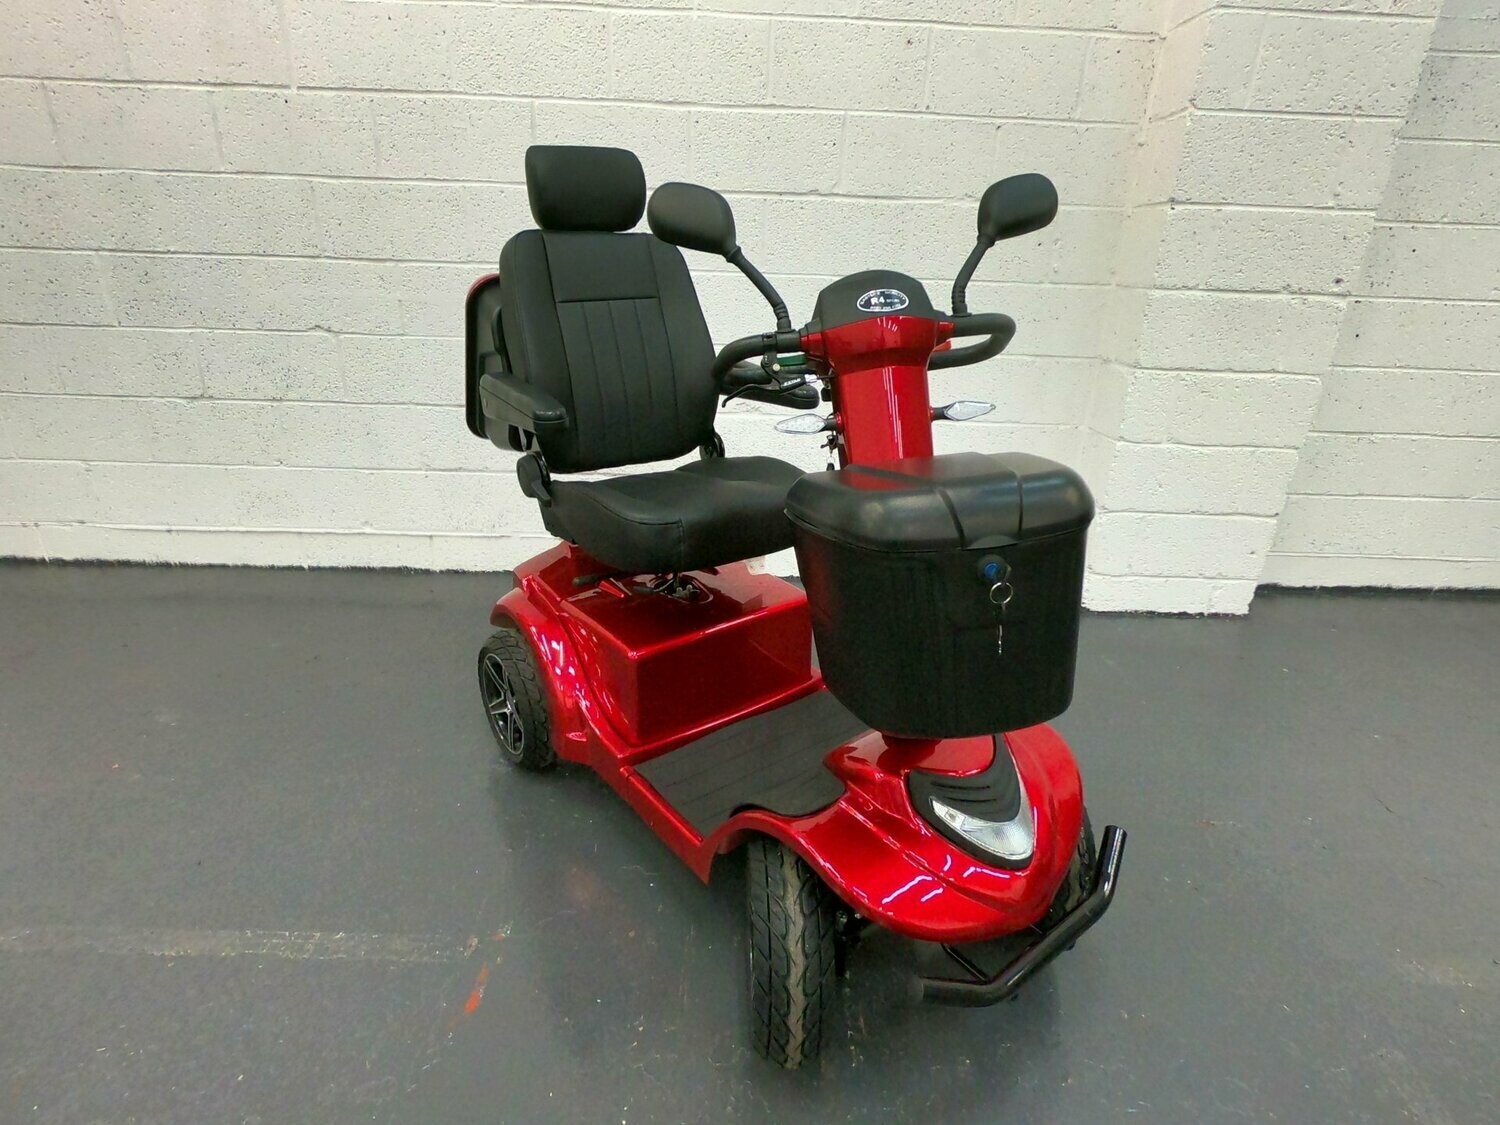 R4 SPORT MOBILITY SCOOTER LIMITED EDITION